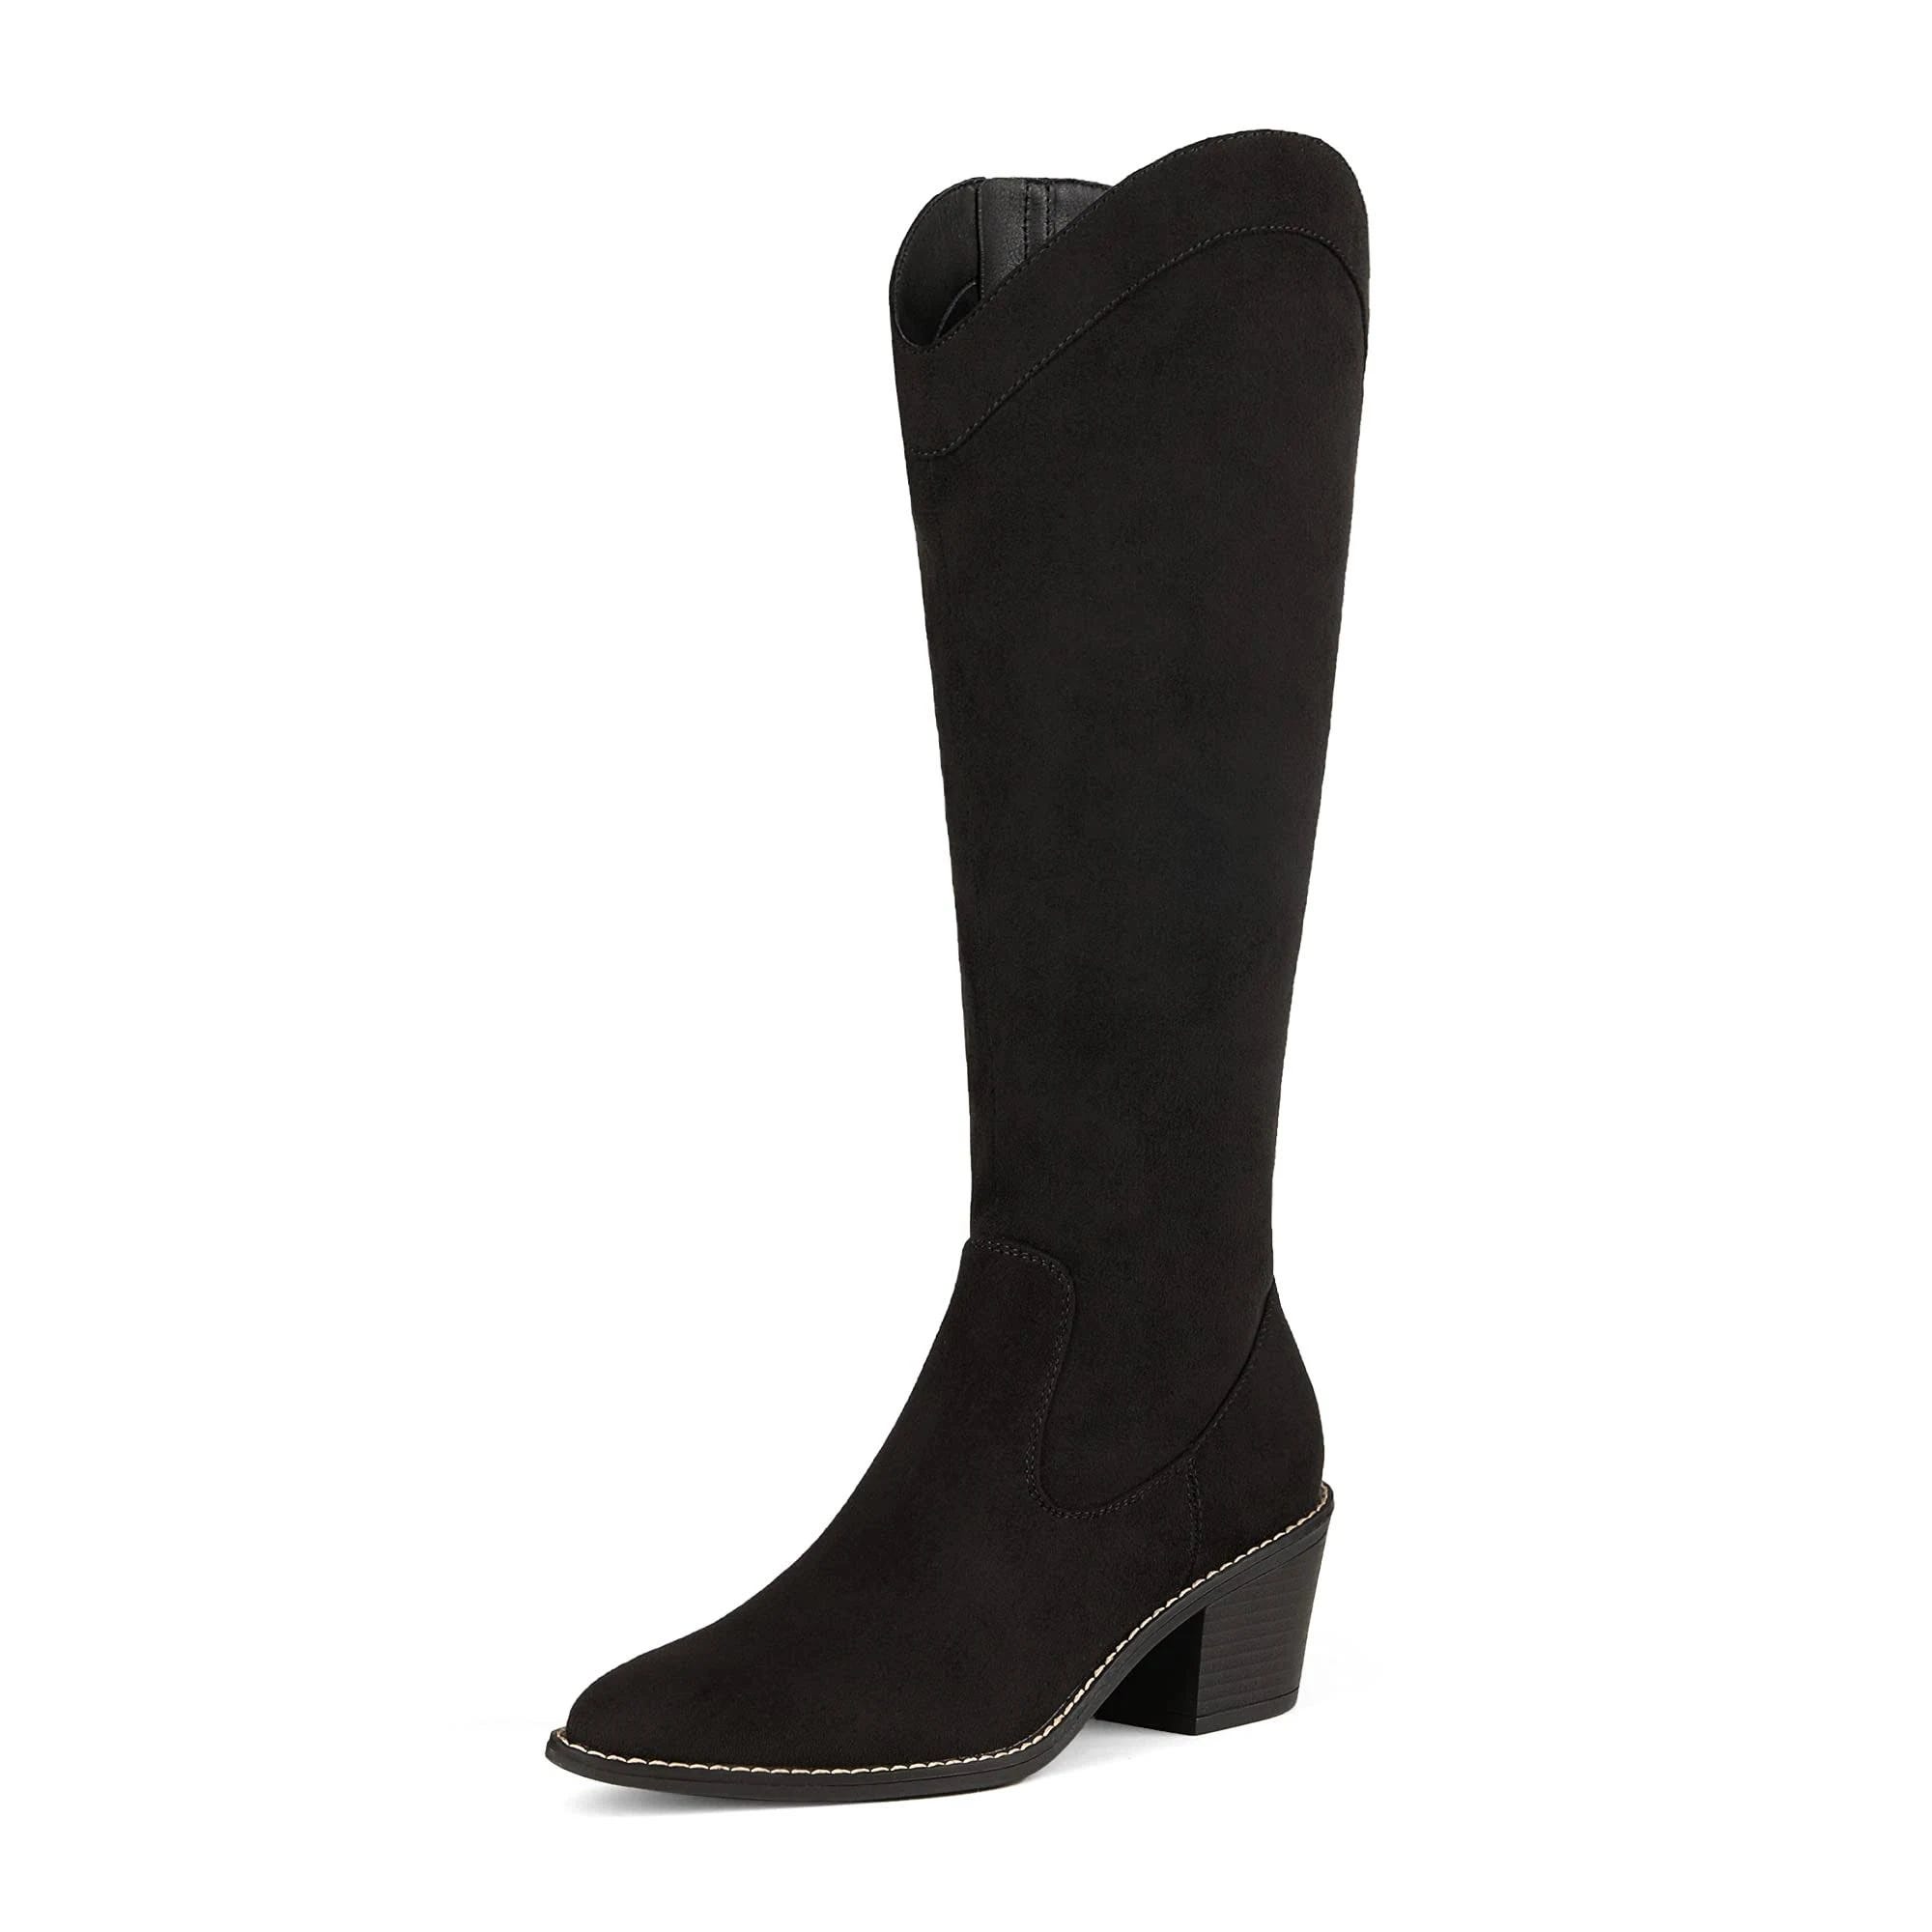 Elegant Pointed-Toe Cowgirl Boots for Women, Knee-High in Black Suede | Image